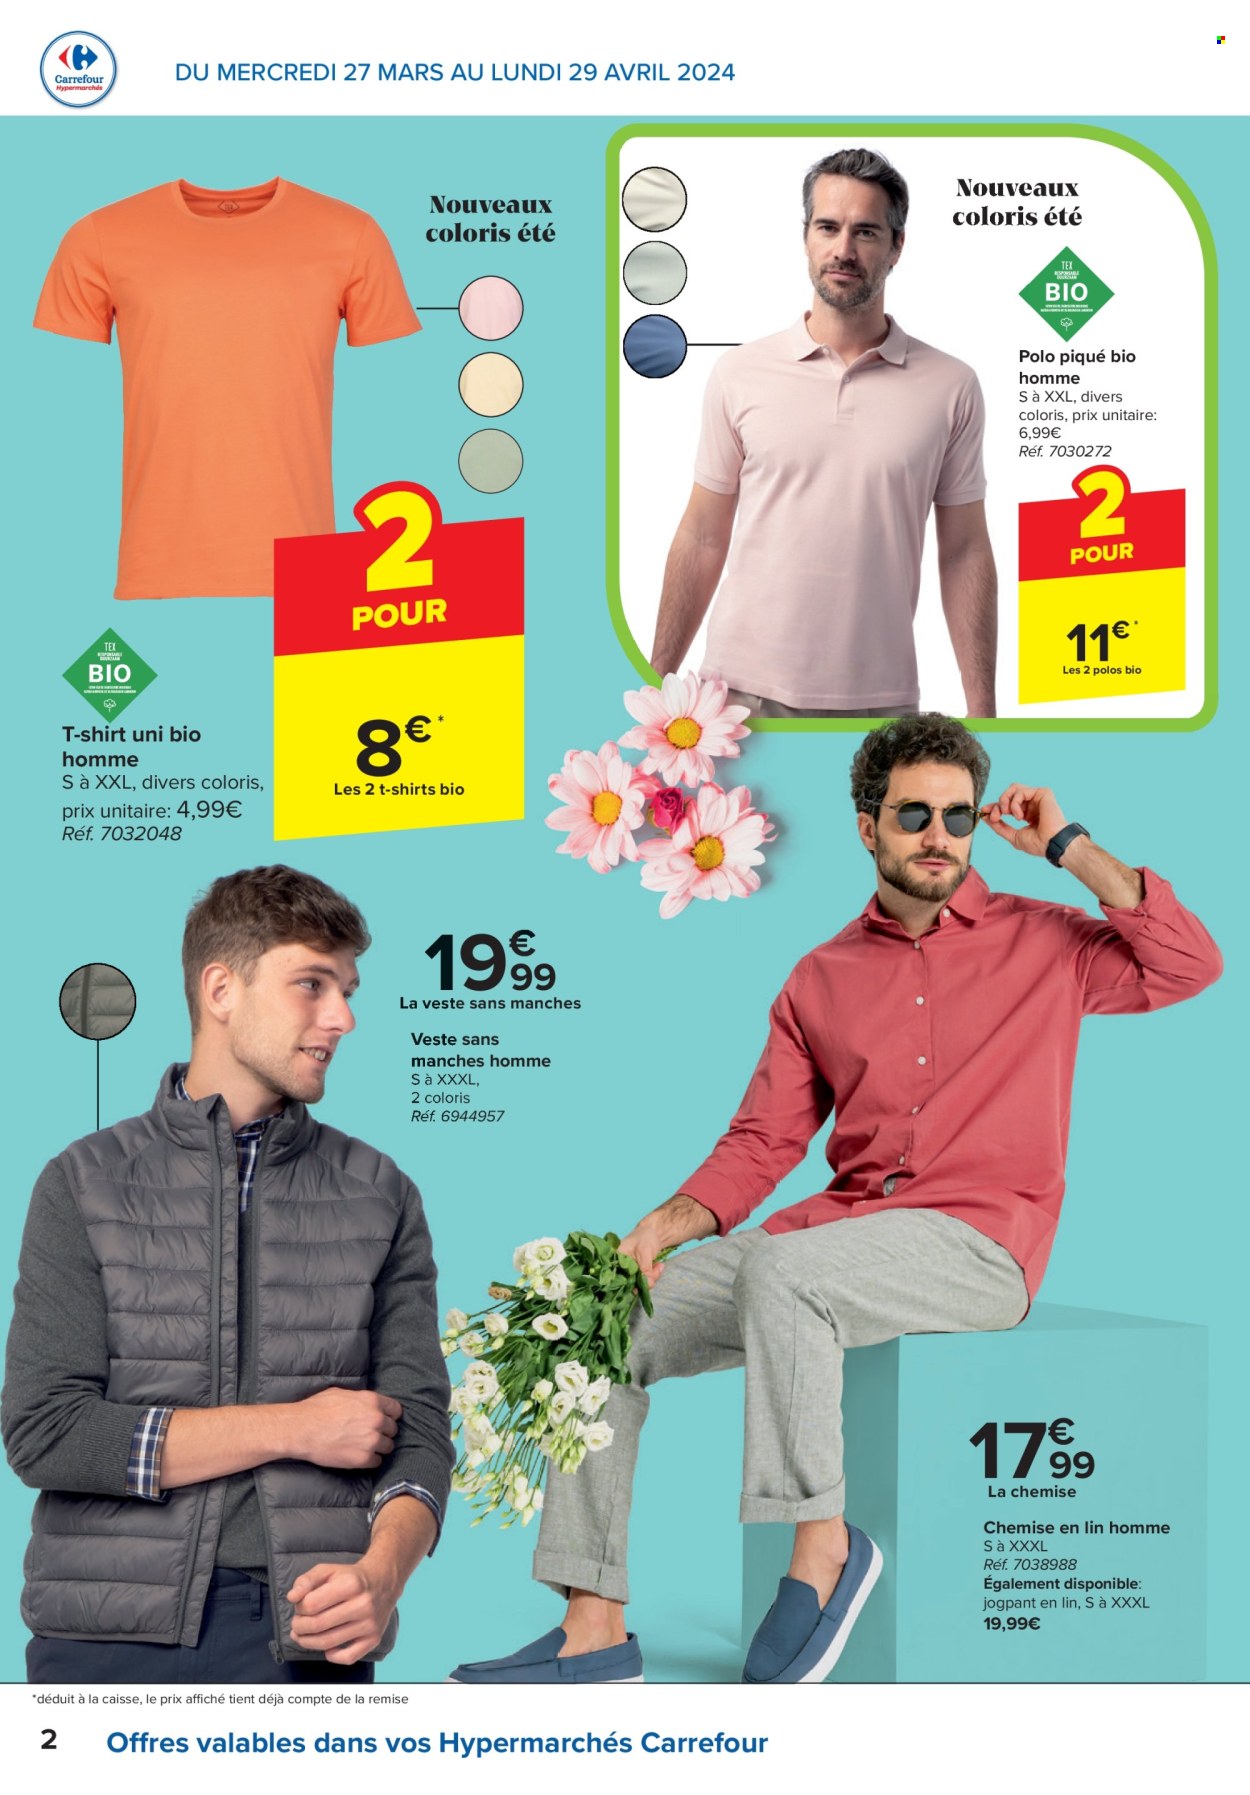 Catalogue Carrefour hypermarkt - 27.3.2024 - 29.4.2024. Page 2.